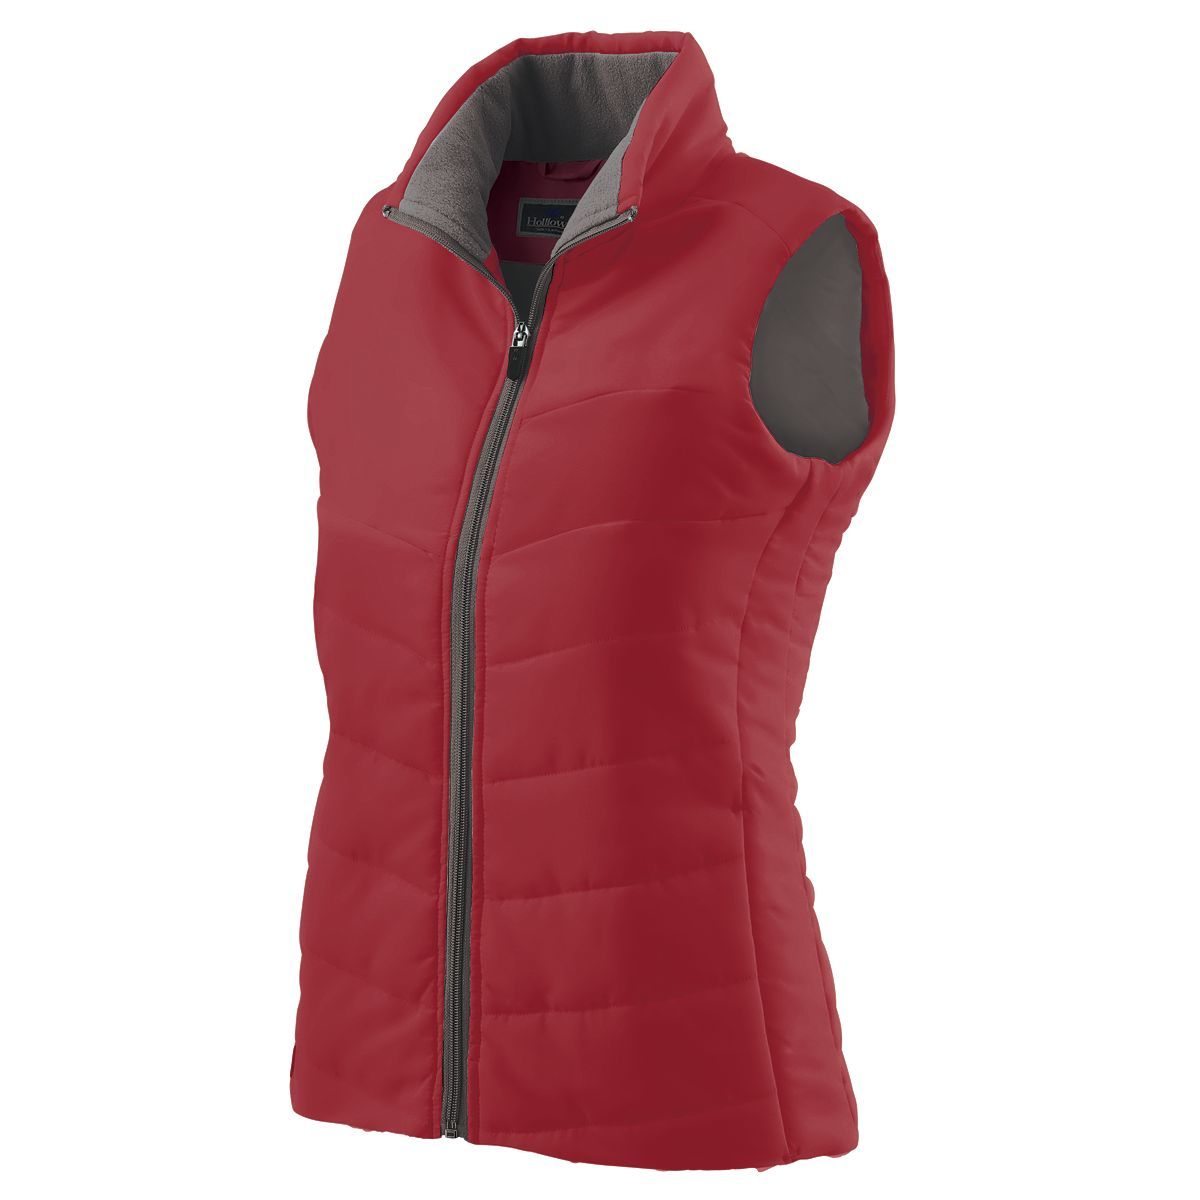 Holloway Ladies Admire Vest in Scarlet  -Part of the Ladies, Holloway, Outerwear product lines at KanaleyCreations.com